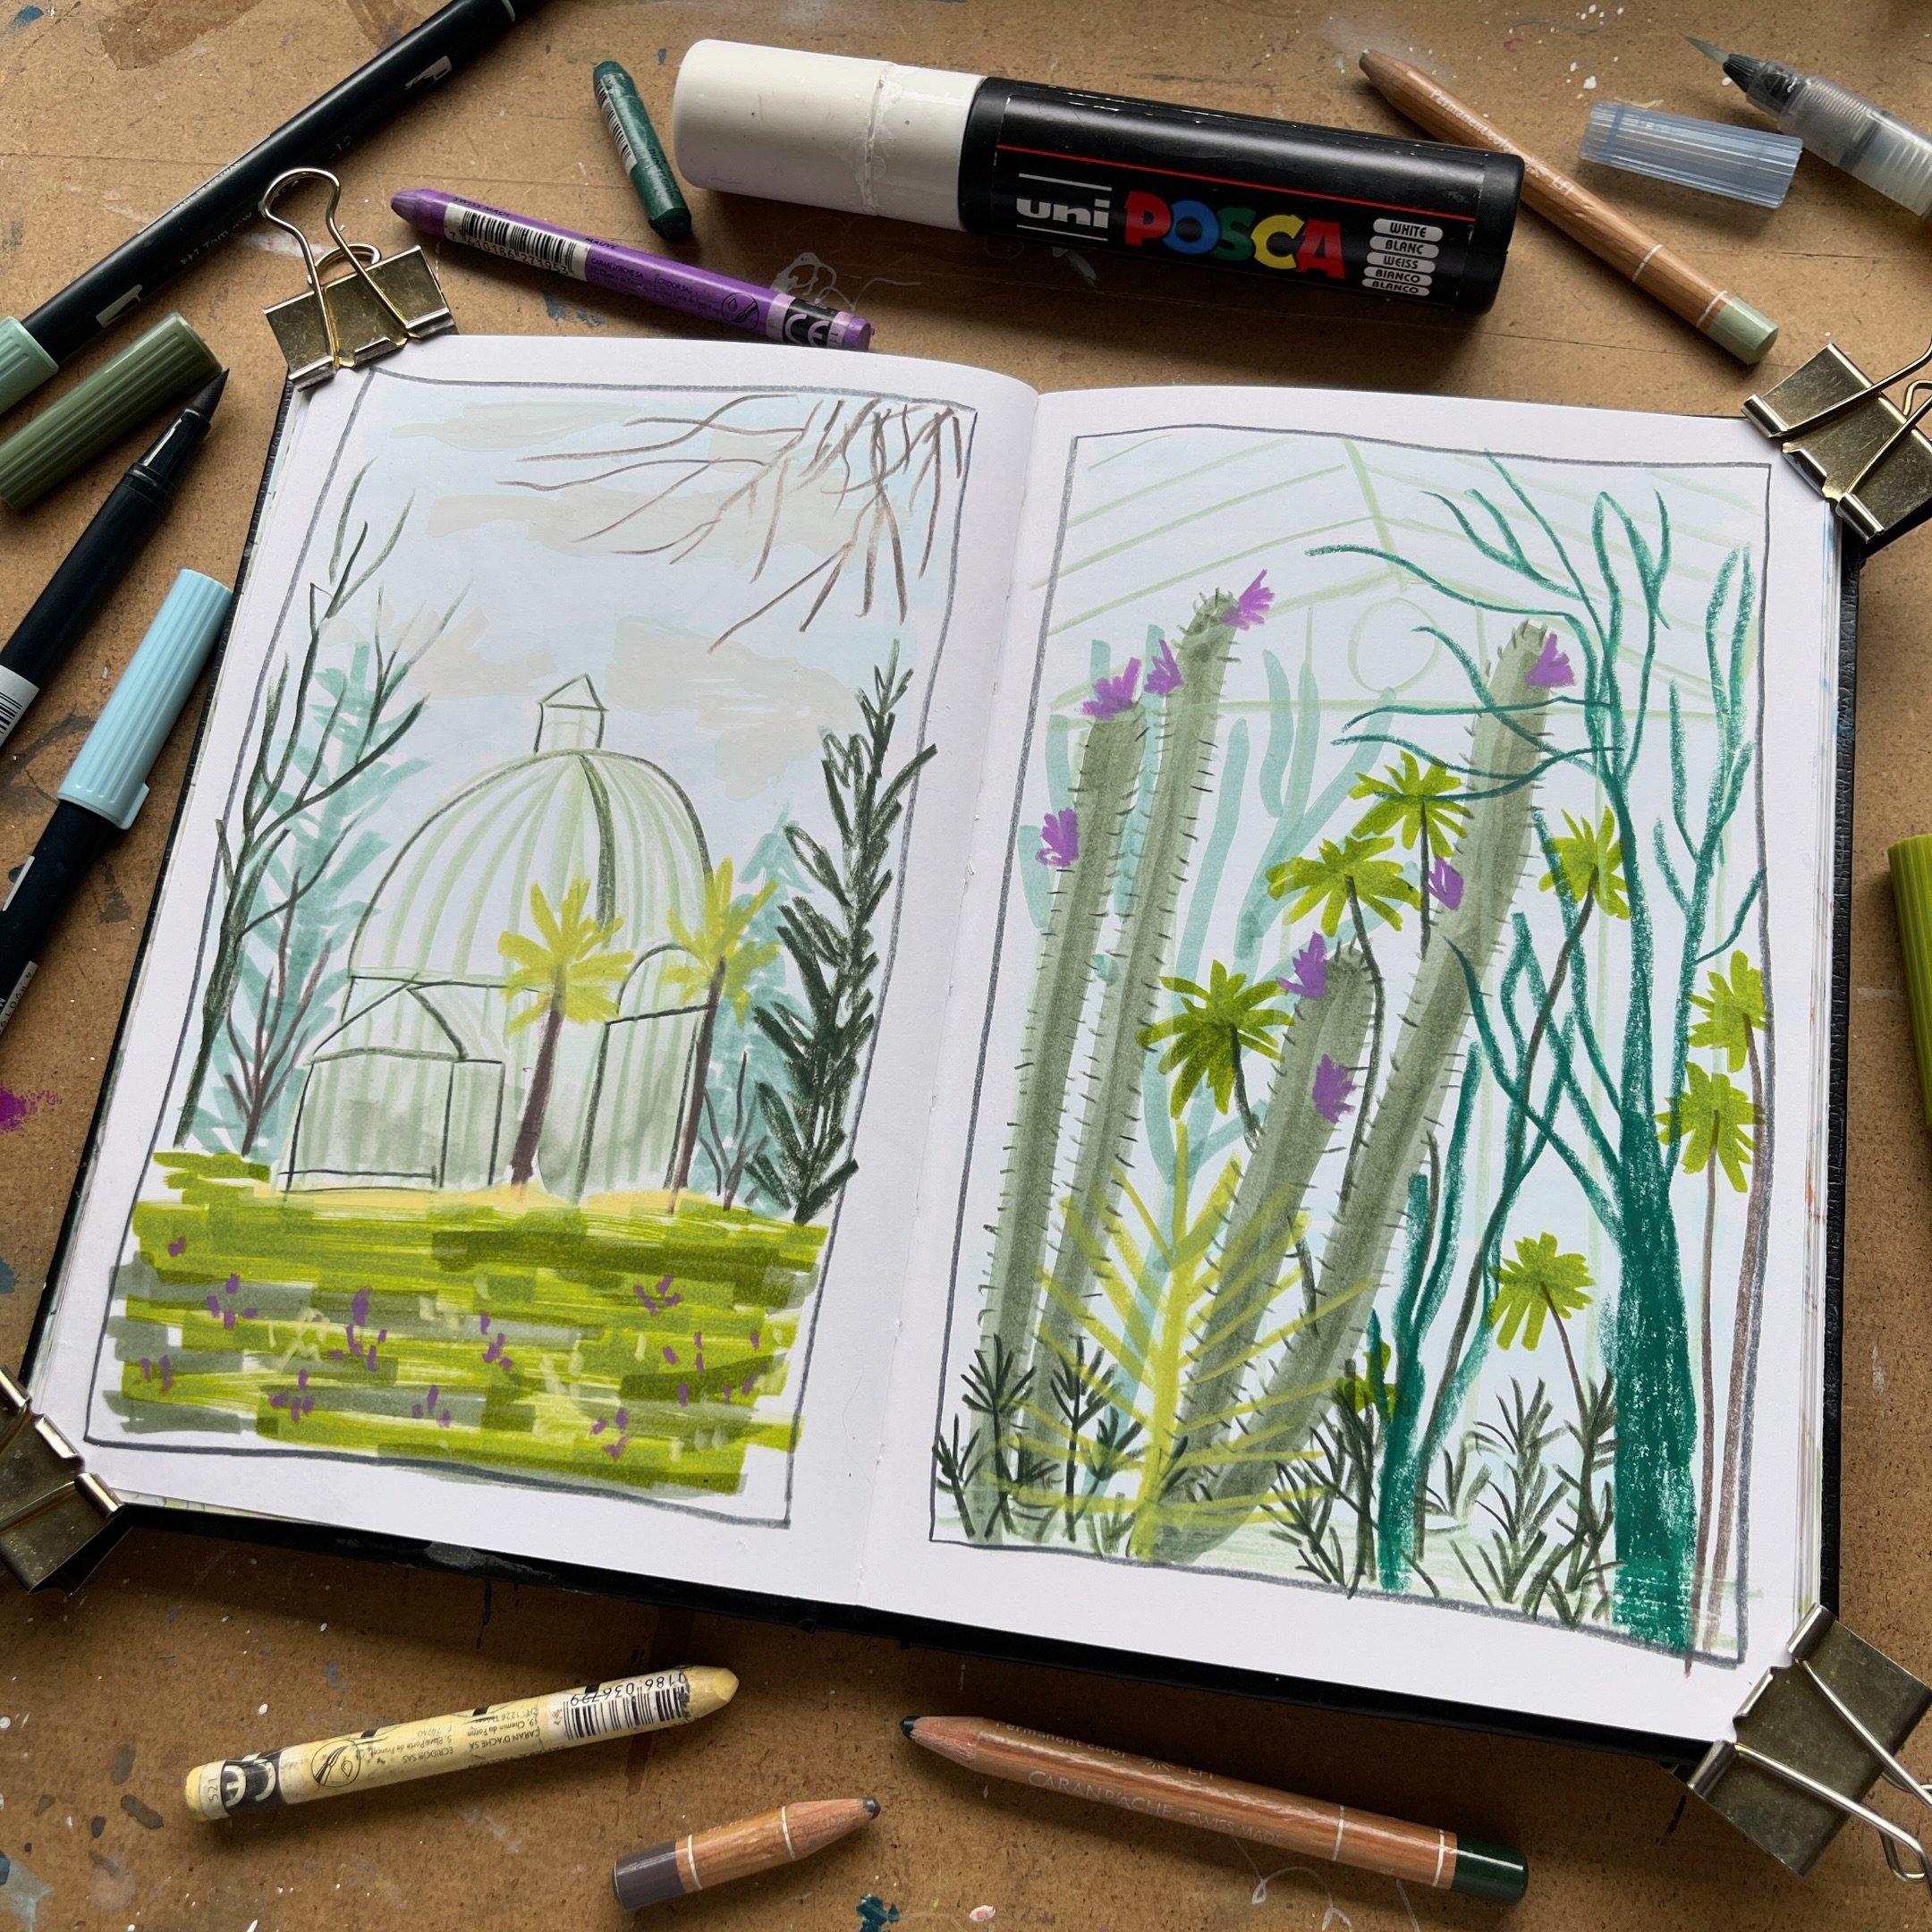 Today on my Patreon I&rsquo;m sharing a real-time narrated video of the creation of this sketchbook panel spread ✨

In the video I set two 7.5 minute timers and then fill my pages with the botanical garden scenes (from this week&rsquo;s Inspiration T